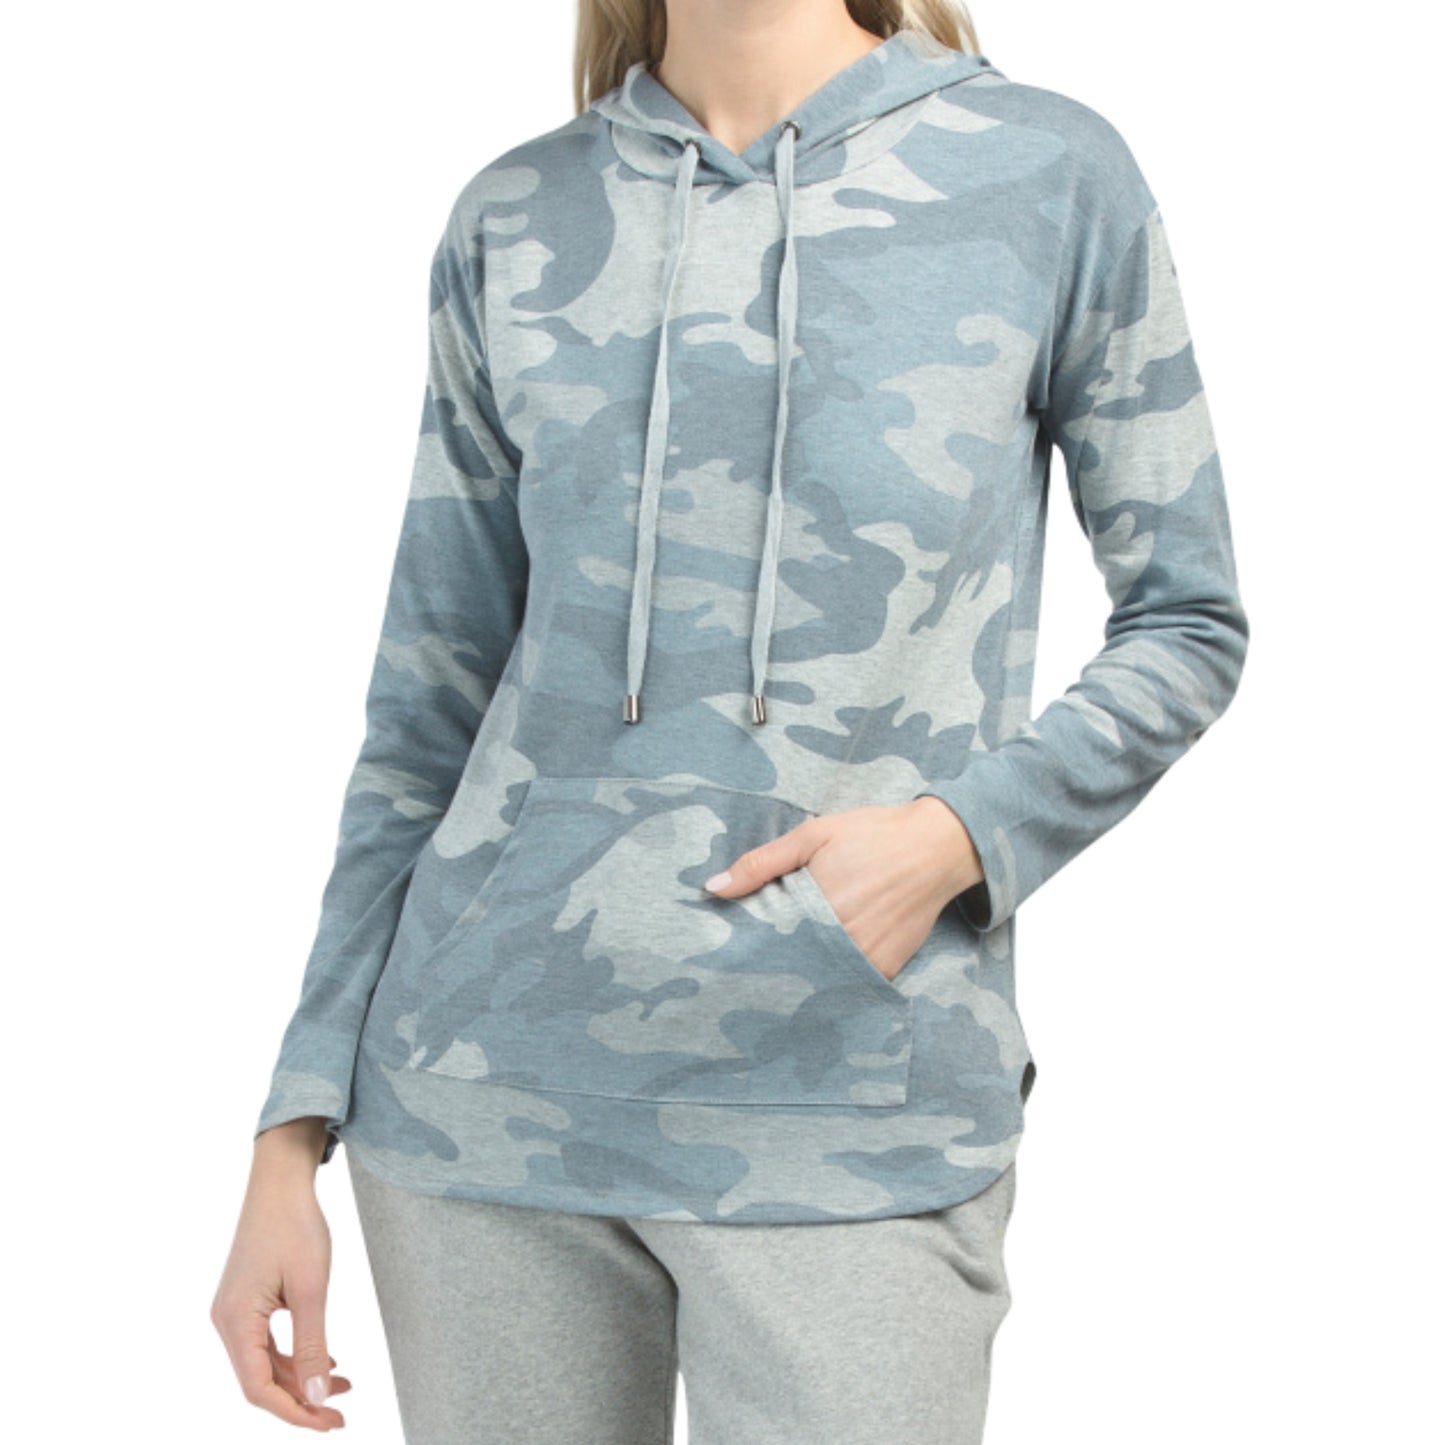 Cyrus Women's French Terry Camo Print Pullover Sweatshirt Casual Hoodie